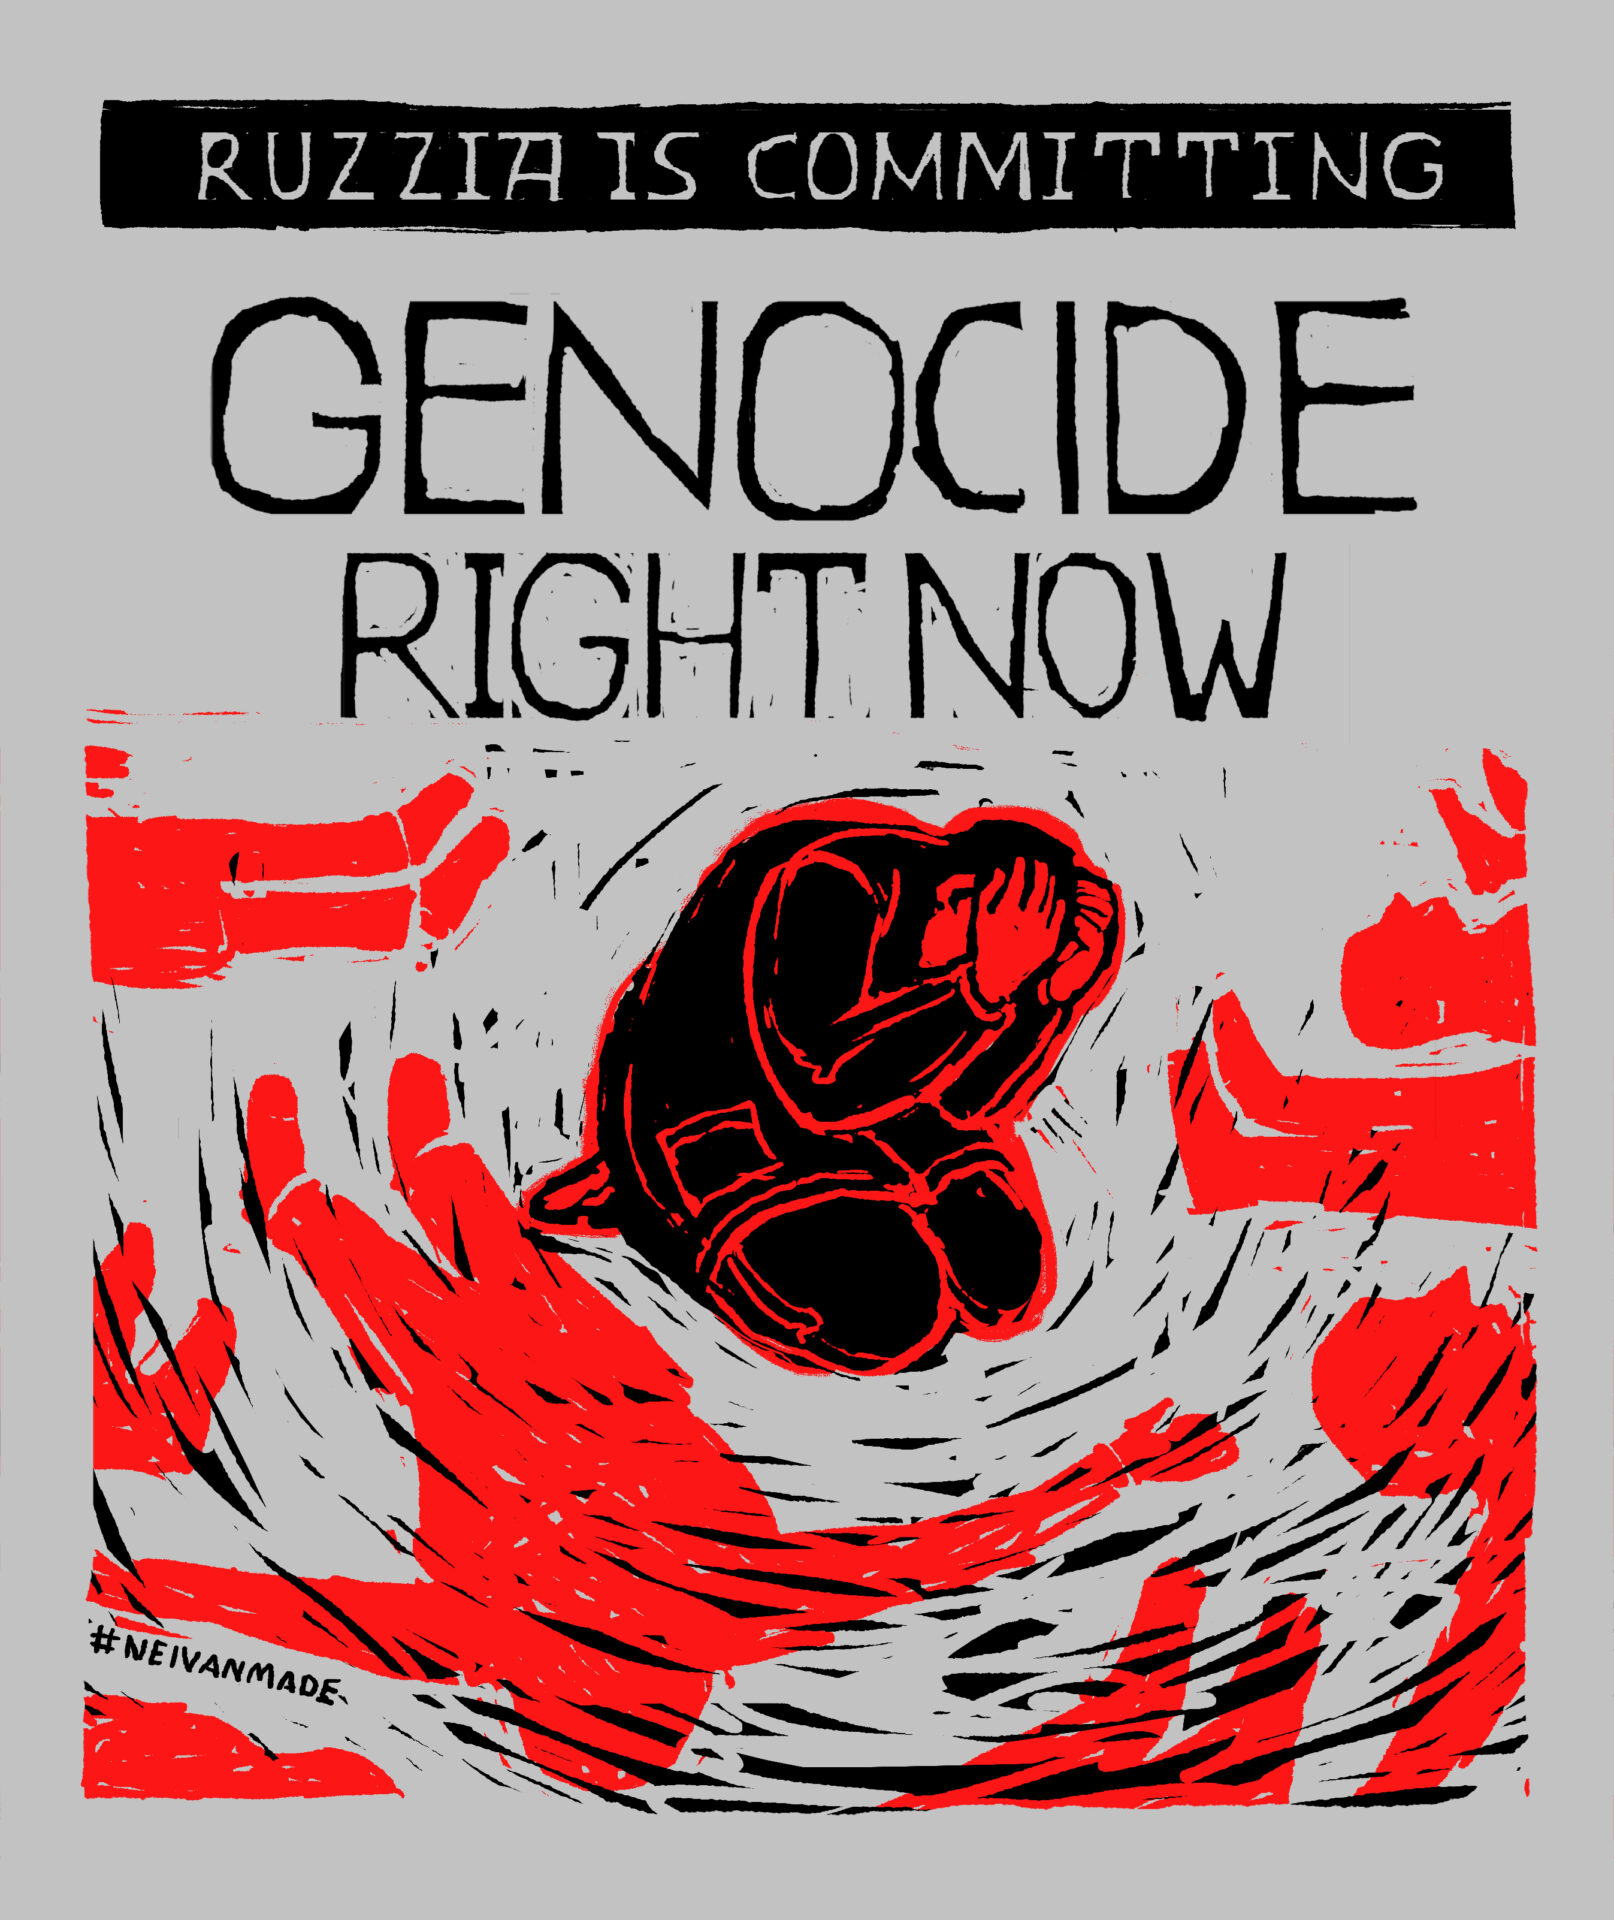 Art by NEIVANMADE of a Ukrainian painted black and outlined in blood red kneeling in grief with hands covering the face surrounded by the bodies of Ukrainians killed by Russians on a grey background. "Russia Is Committing Genocide Right Now" is across the top center of the image.